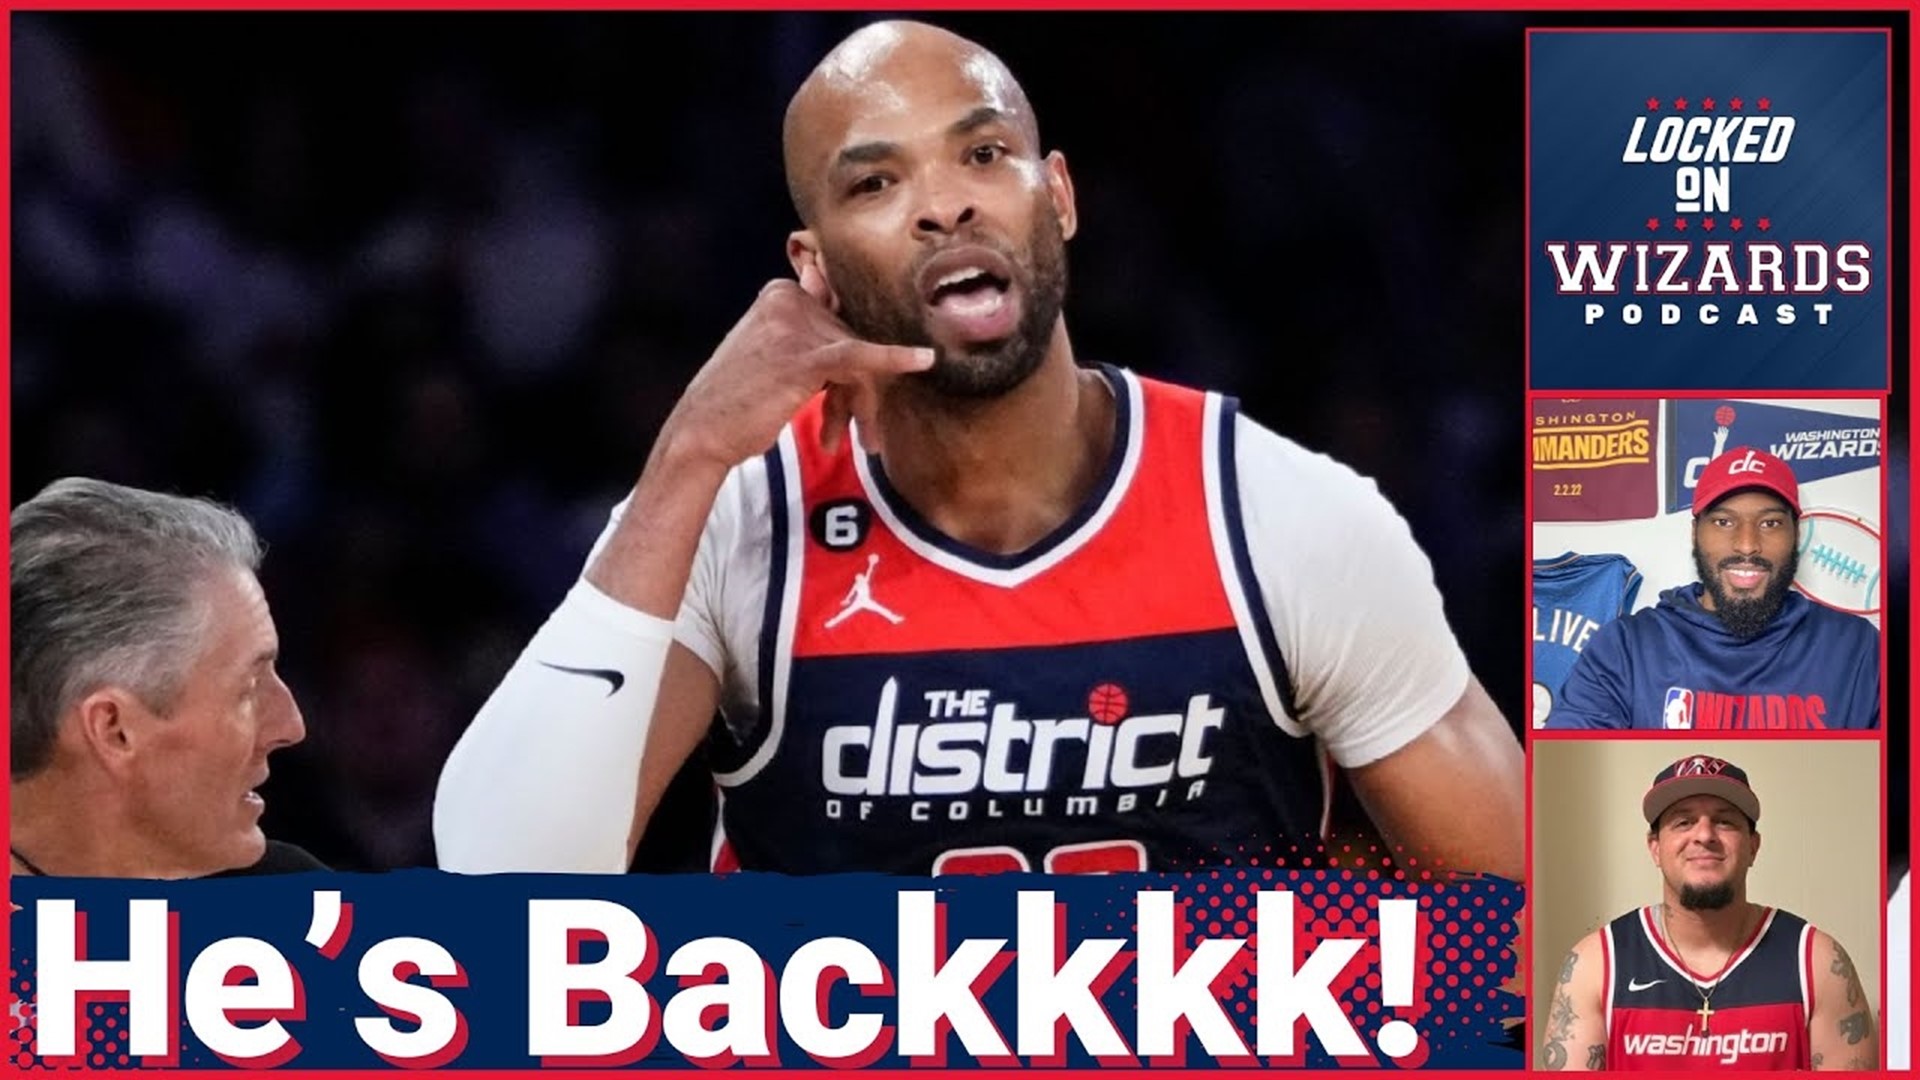 Brandon discusses the Wizards resigning Taj Gibson to a 1 year deal and how he can influence the Wizards young core.